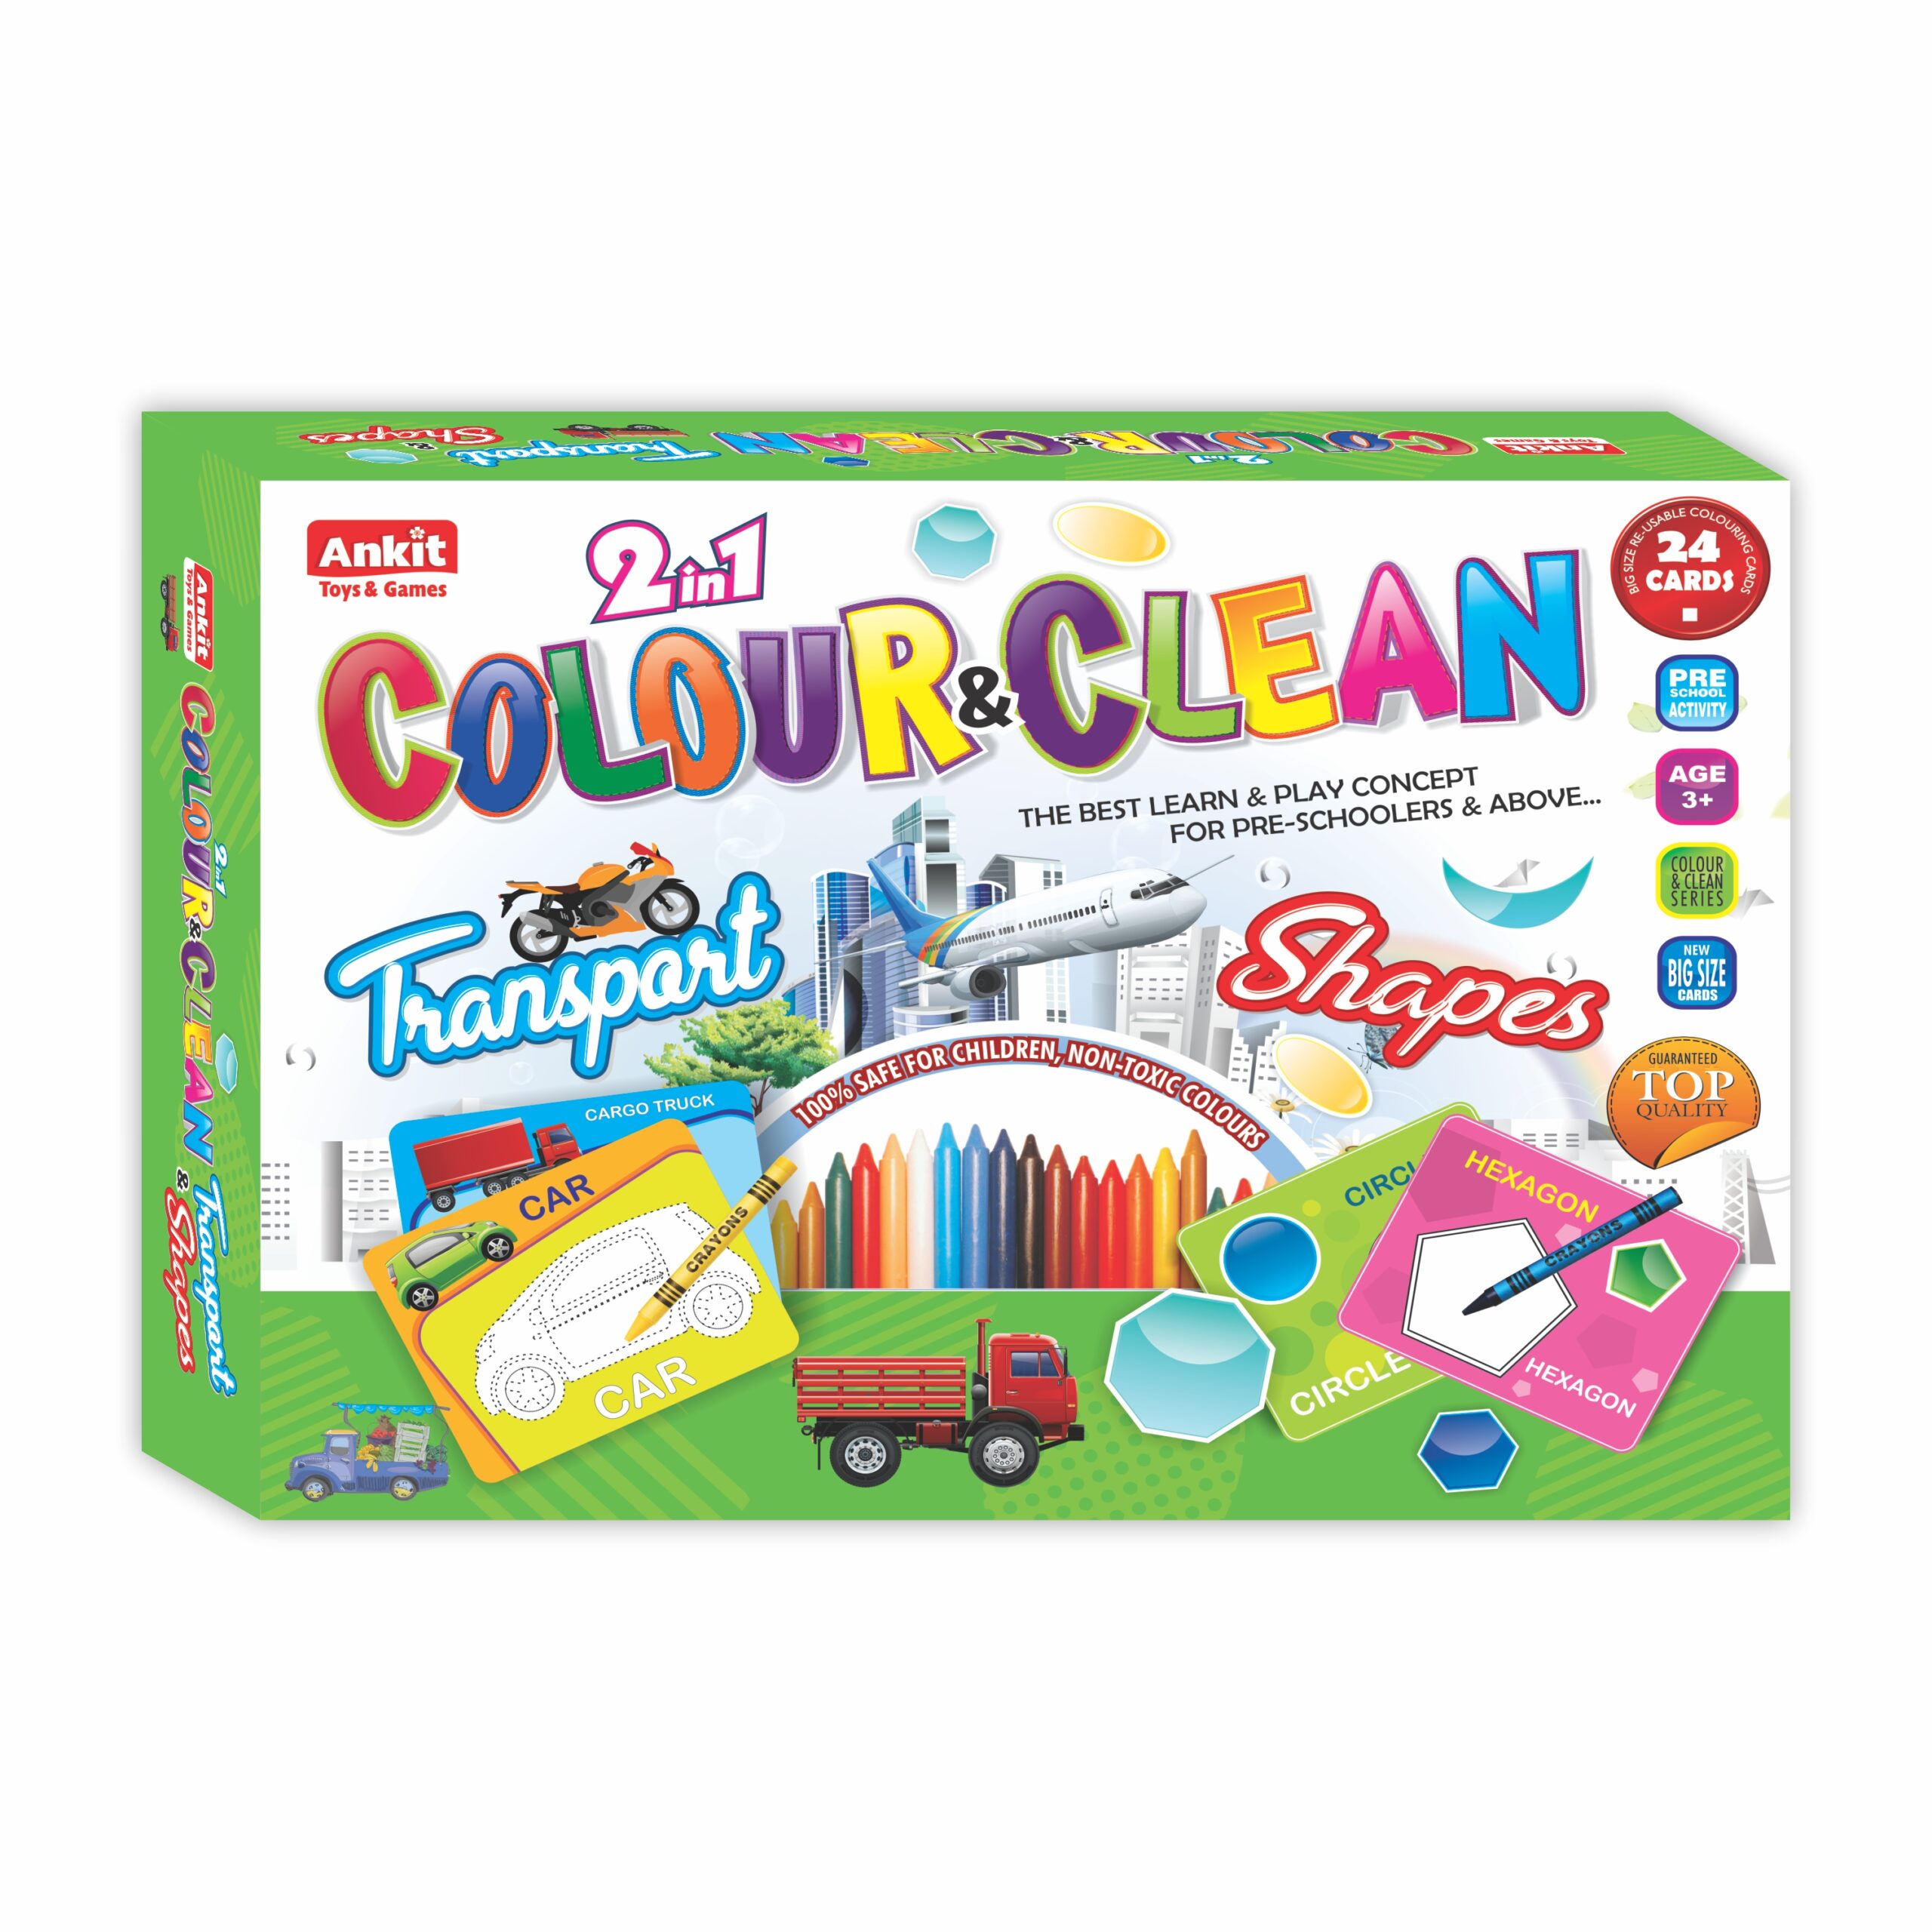 Ankit Toys 2 in 1 Colour & Clean - Transport & Shapes